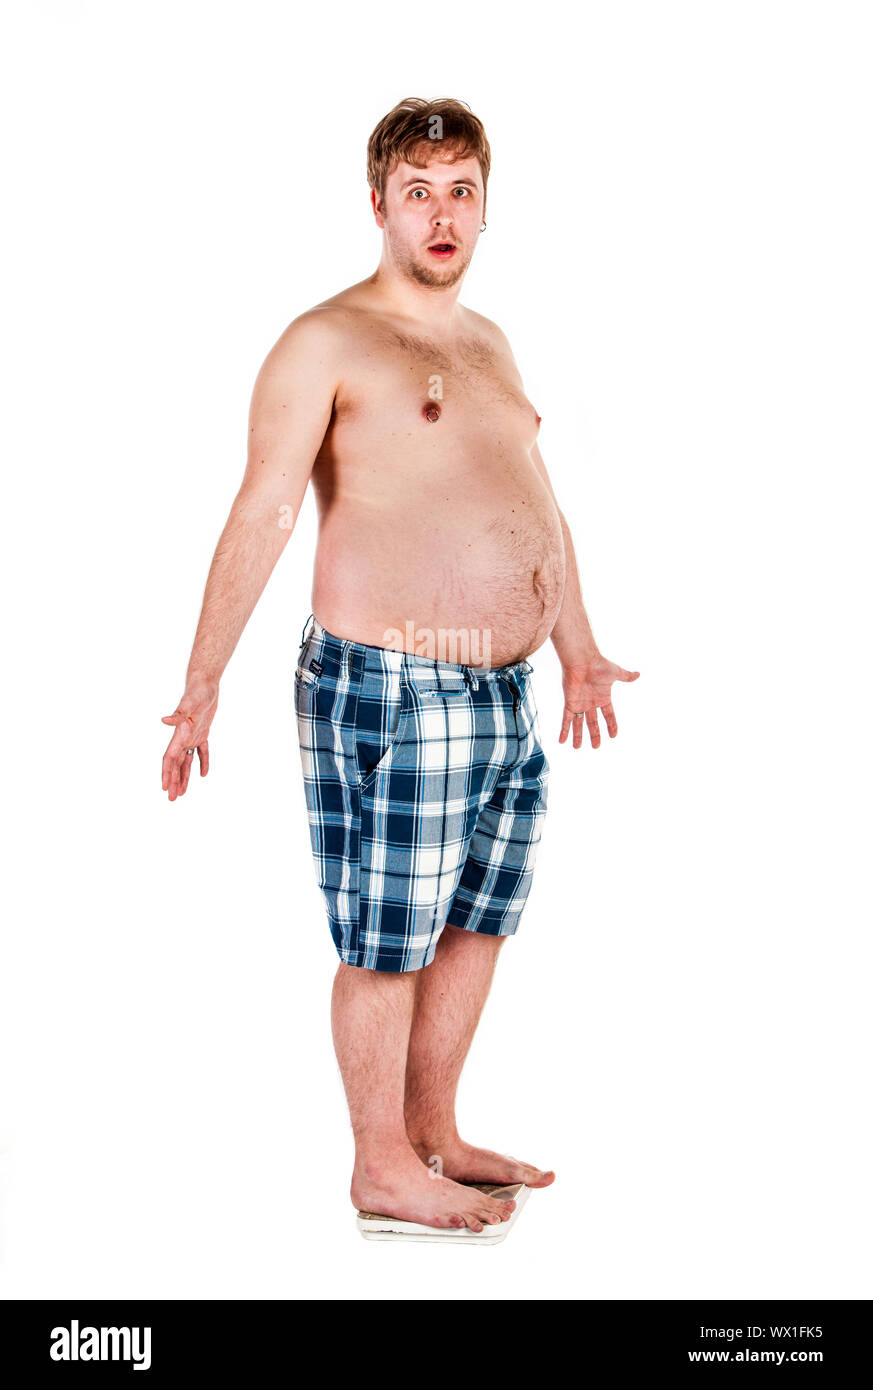 https://c8.alamy.com/comp/WX1FK5/overweight-fat-man-weighing-himself-on-scales-WX1FK5.jpg